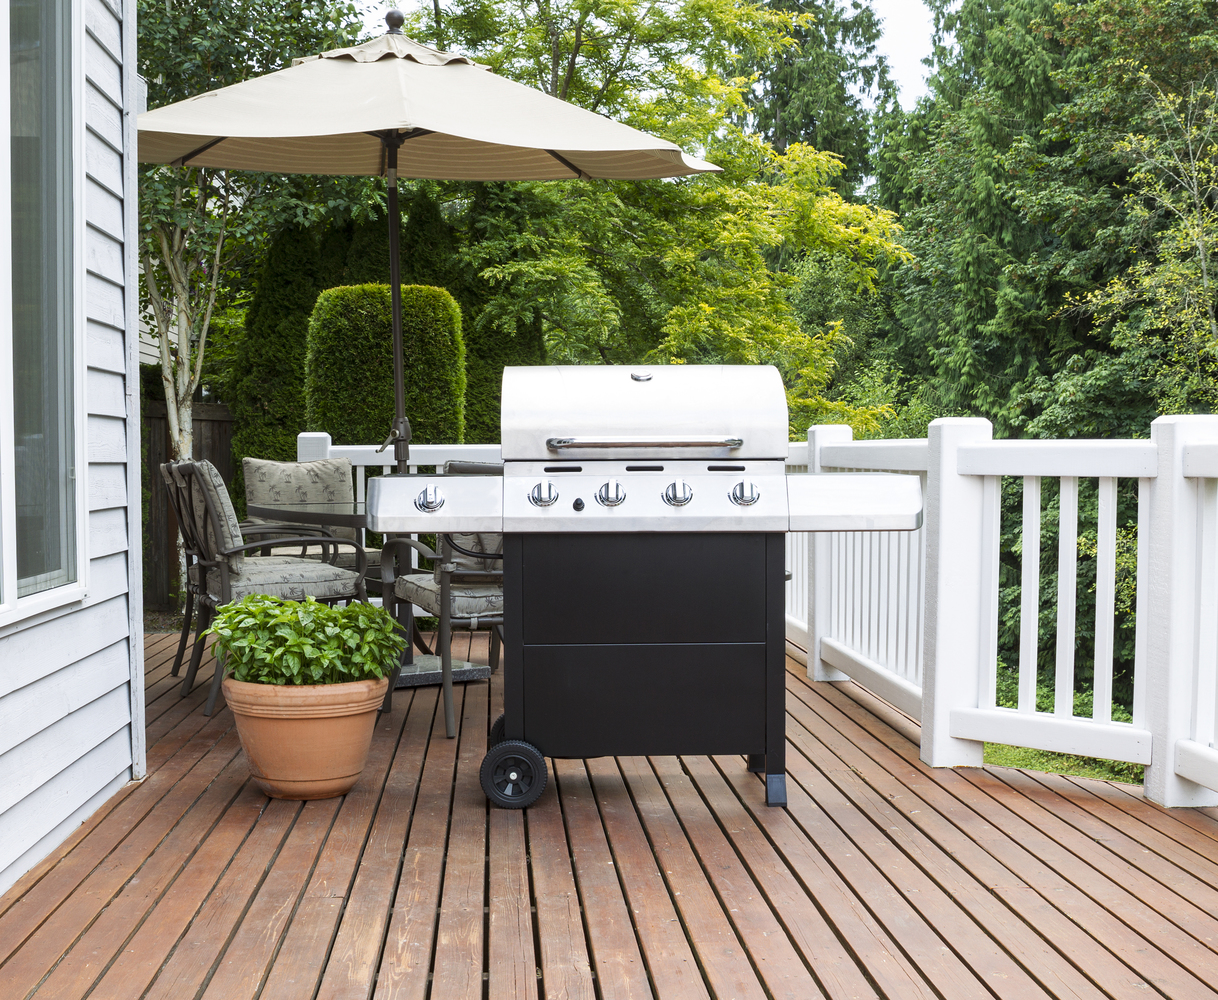 Large barbecue cooker on cedar deck